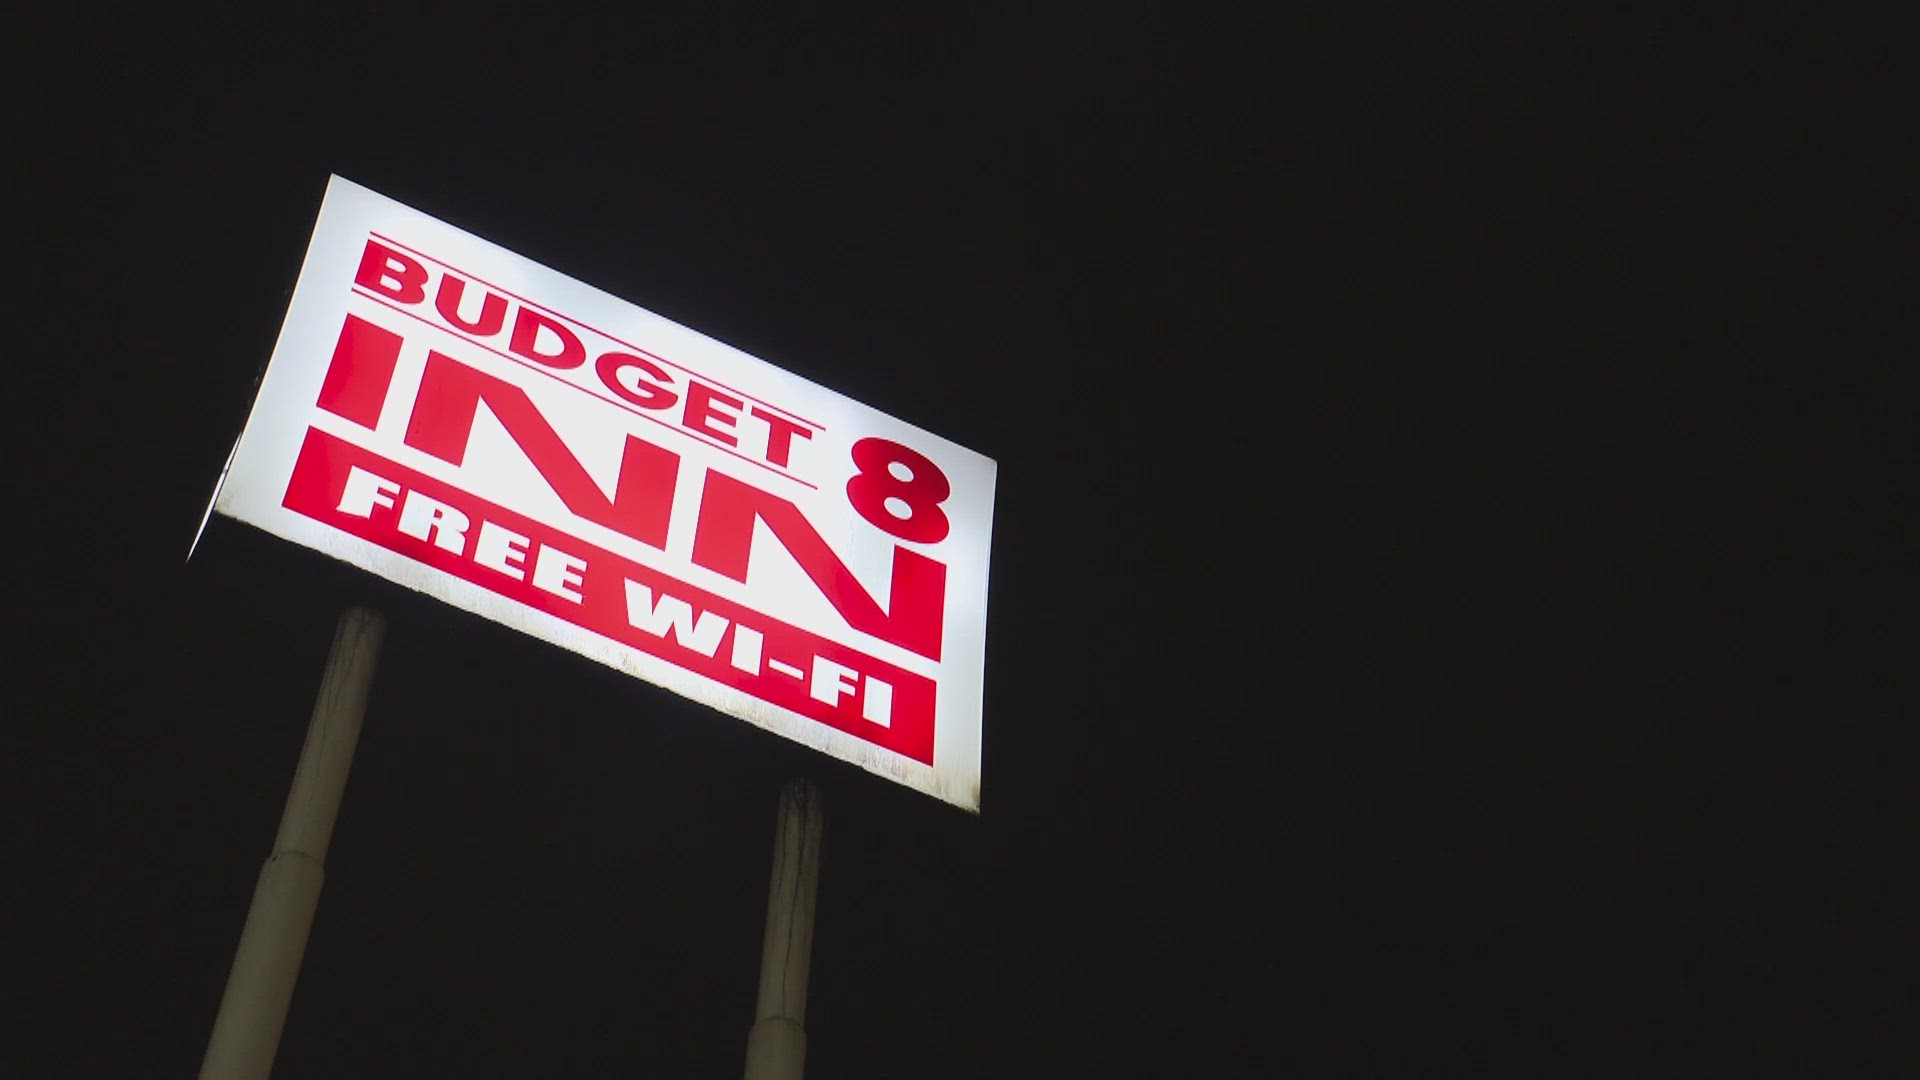 The shooting happened just hours before seven juveniles were shot downtown. It was also the second shooting at the Budget 8 Inn in three days.